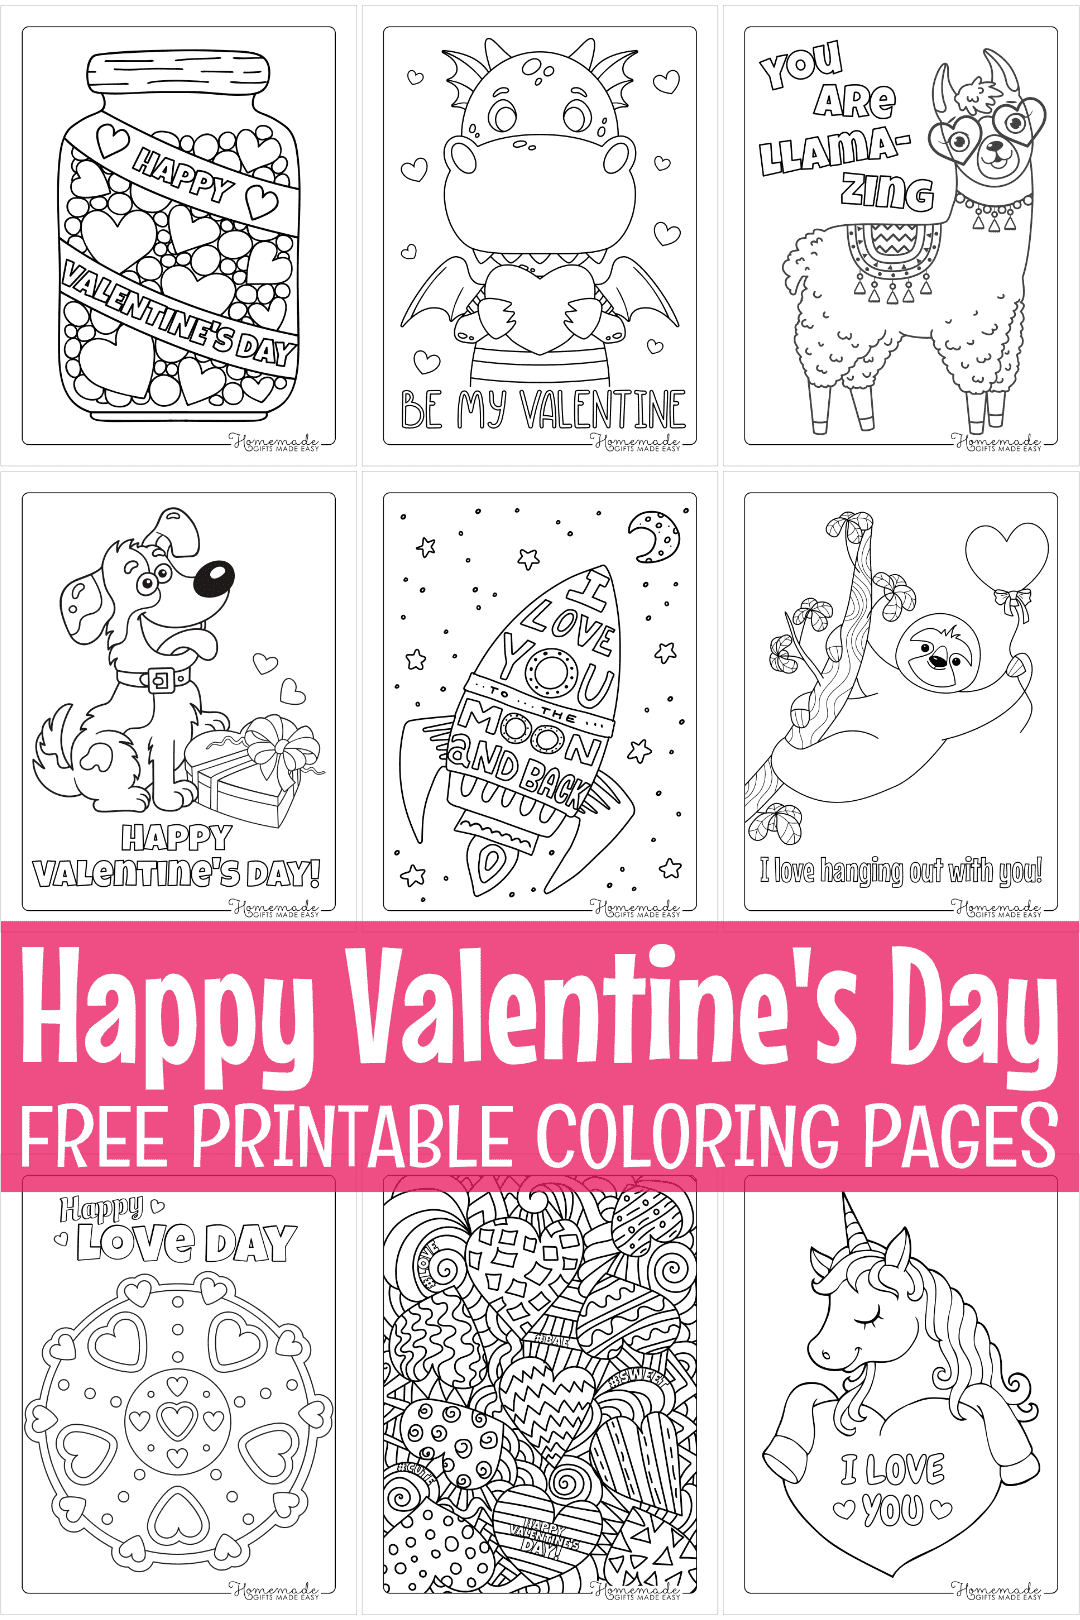 50 Free Printable Valentine S Day Coloring Pages See more ideas about valentines, valentine day crafts, valentine crafts. day coloring pages